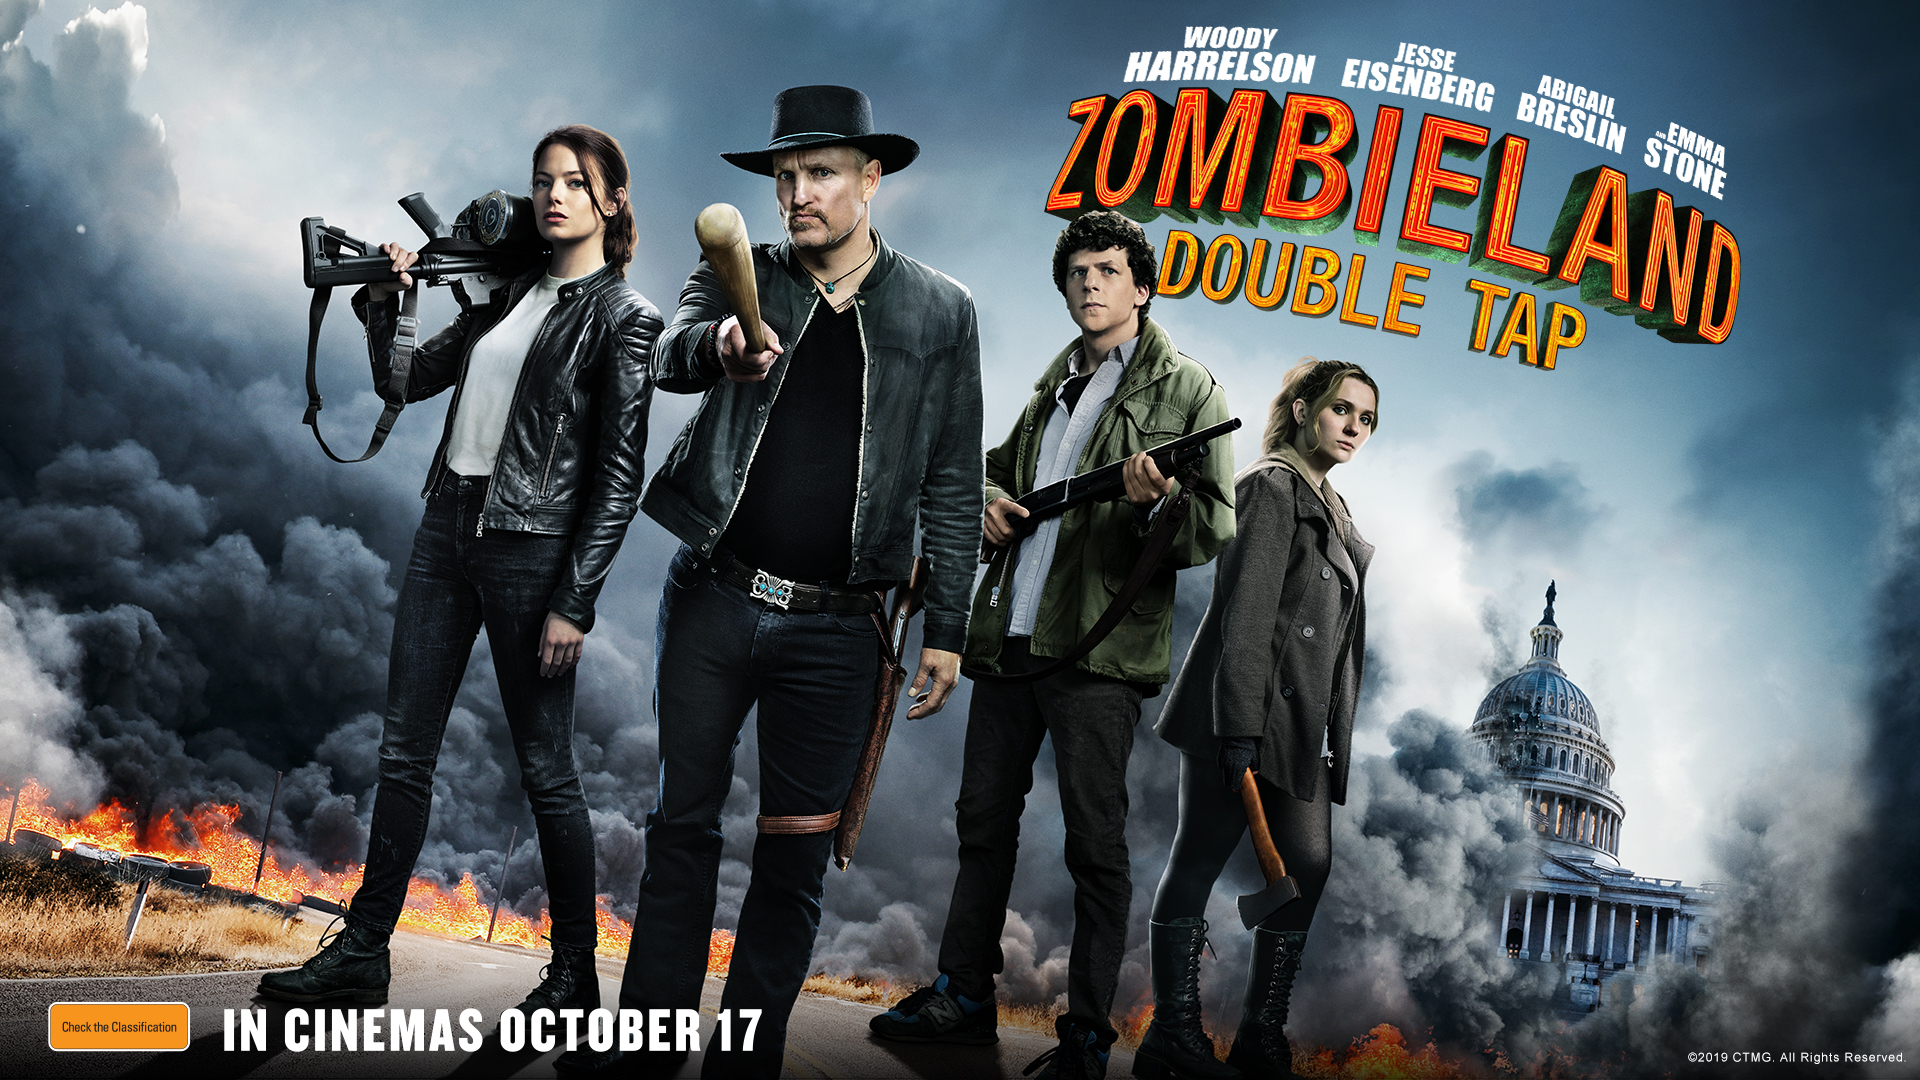 Be Among The First To See Zombieland: Double Tap At